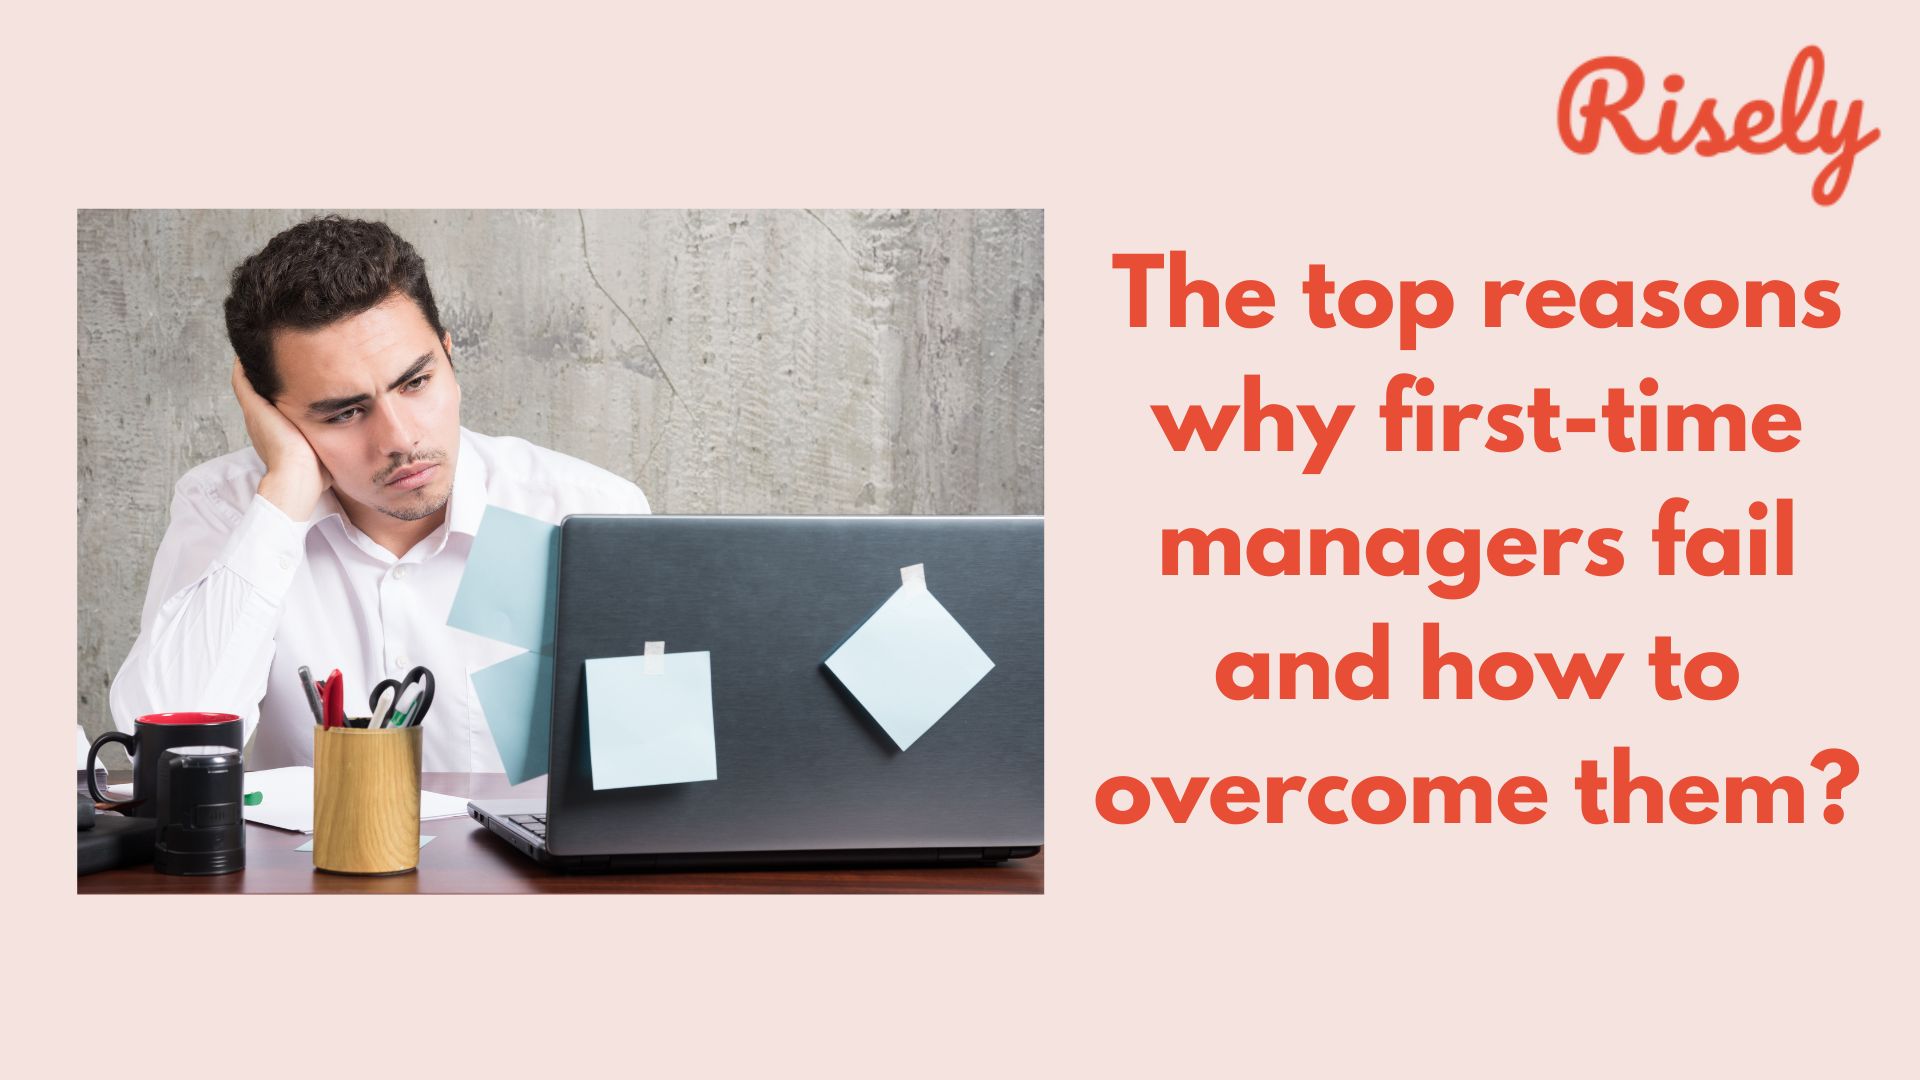 The top reasons why first-time managers fail and how to overcome them?